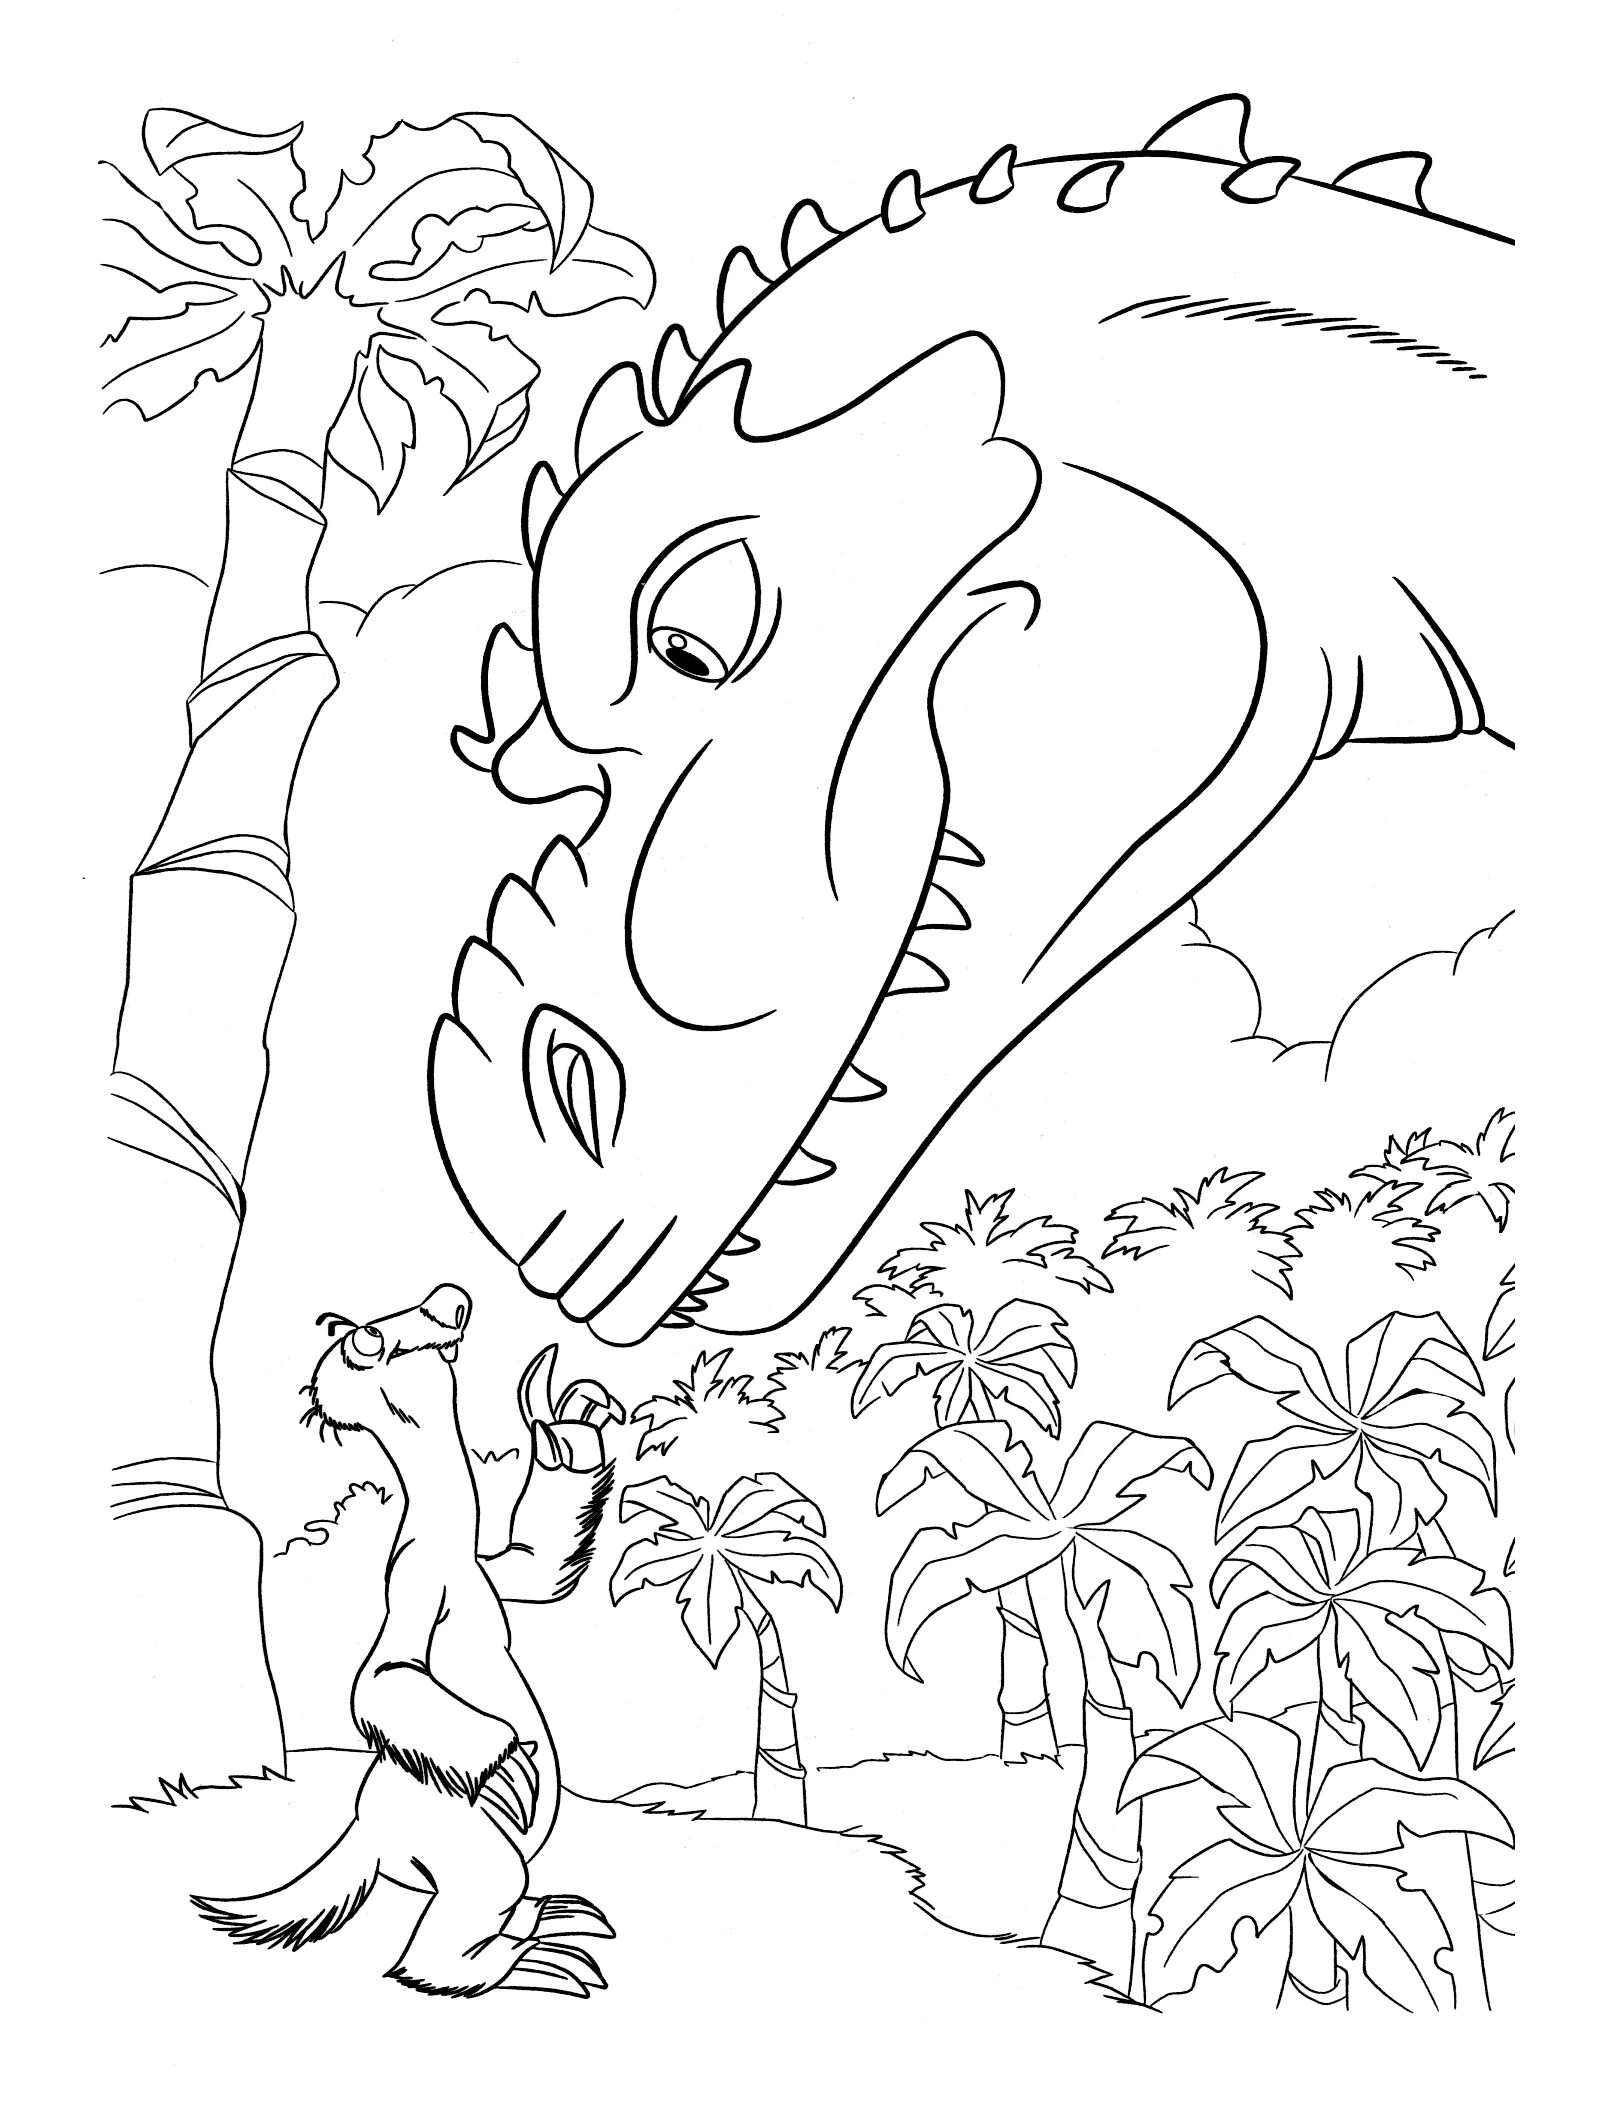 Glorious Ice Age 3 coloring page